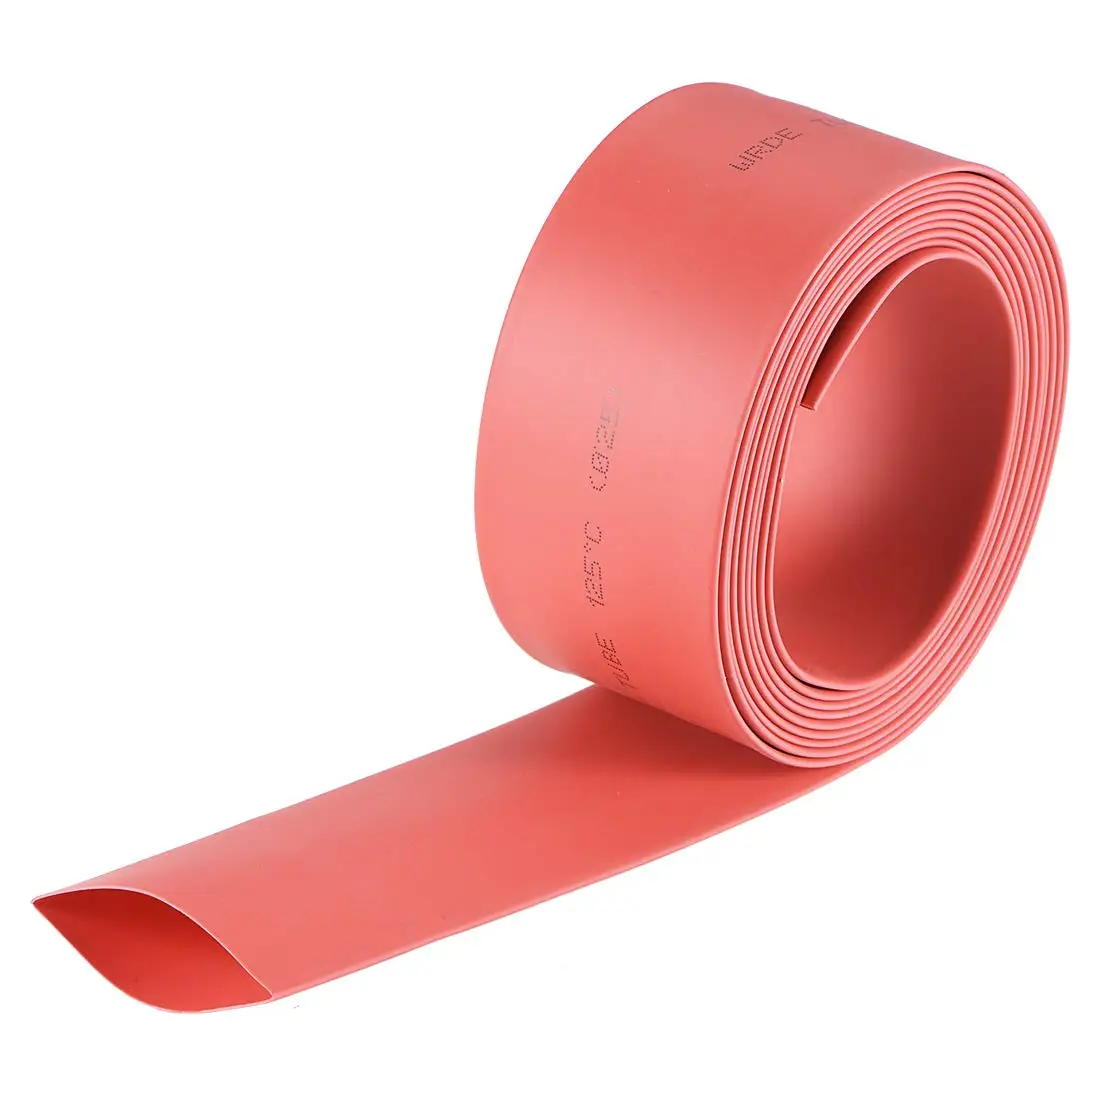 

Keszoox Heat Shrink Tubing, 1"(25mm) Dia 41mm Flat Width 2:1 Ratio Shrinkable Tube Cable Sleeve 2m - Red